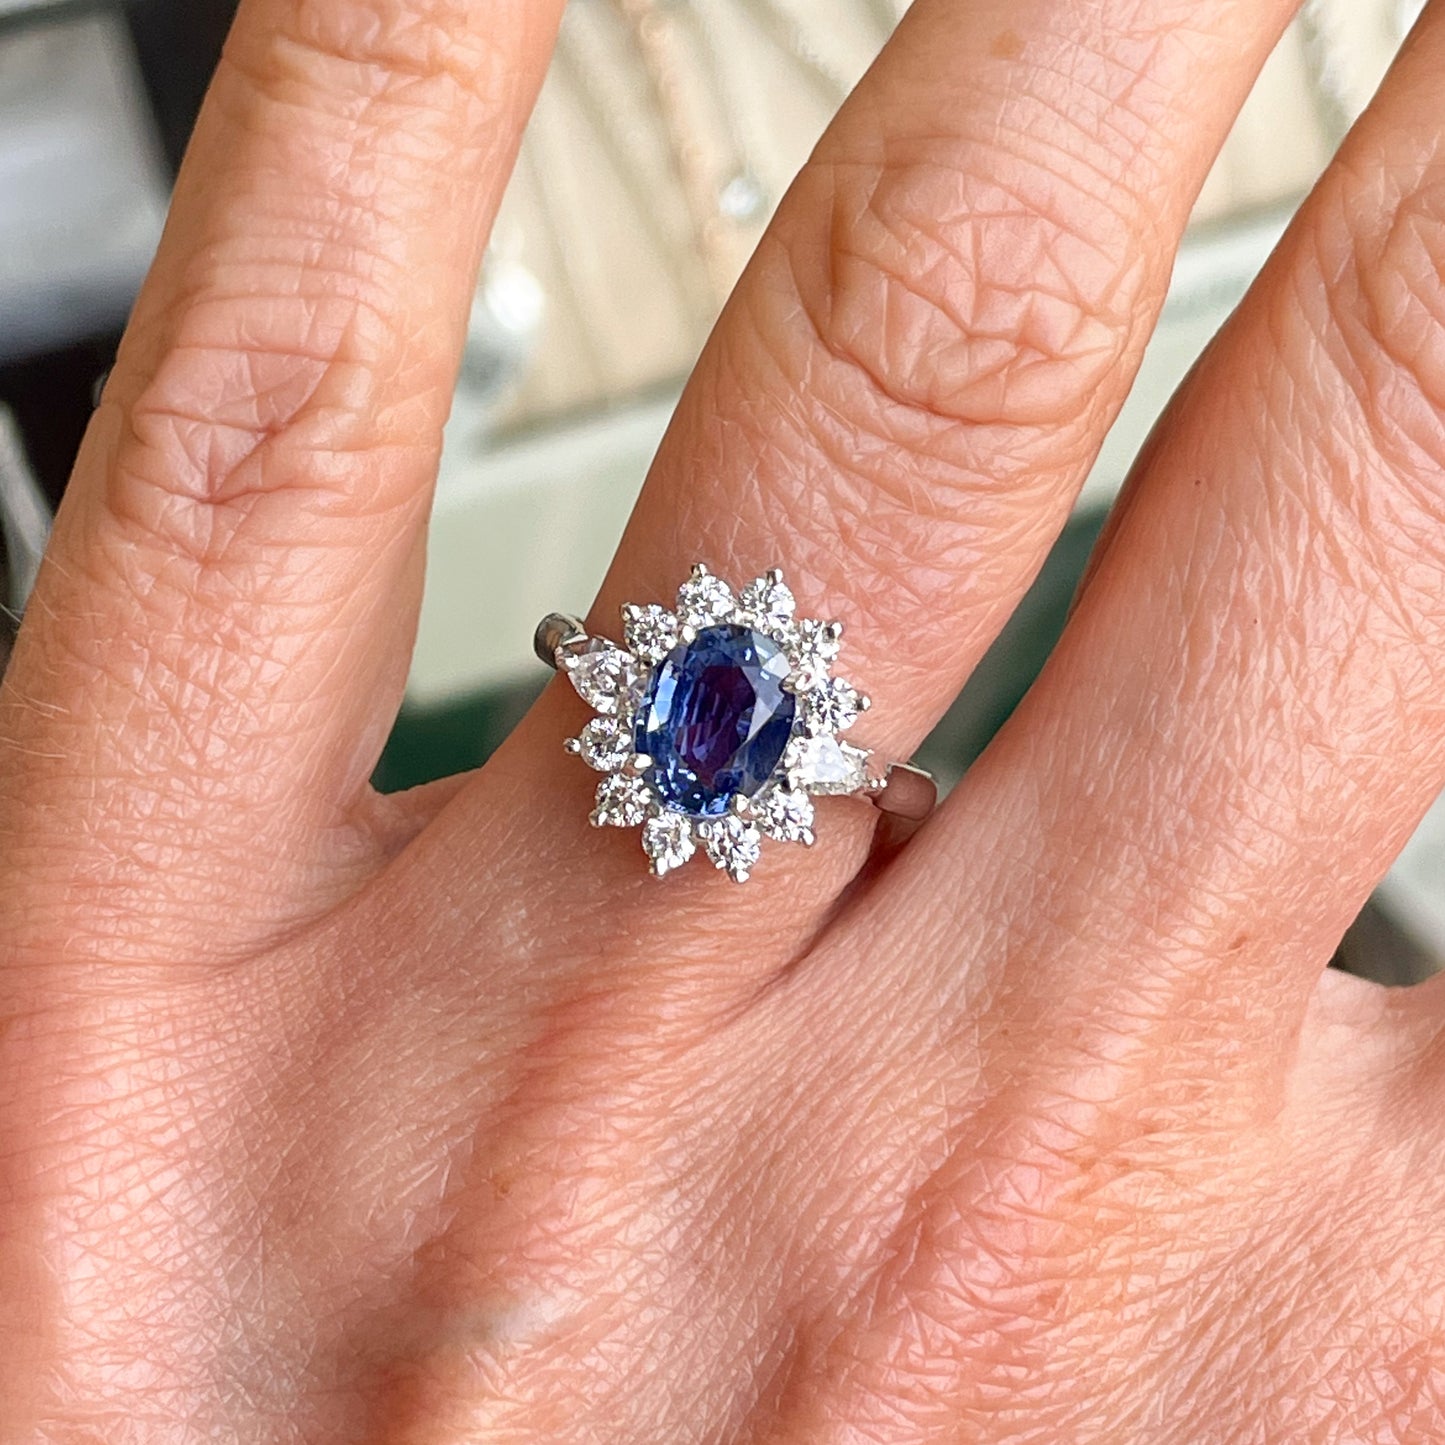 18ct White Gold Sapphire & Diamond Oval Cluster Ring   Oval Cut Sapphire: 2.04cts  Pear Cut Diamonds: 0.20ct in total  Round Brilliant Cut Diamonds: 0.52ct in total  Size N